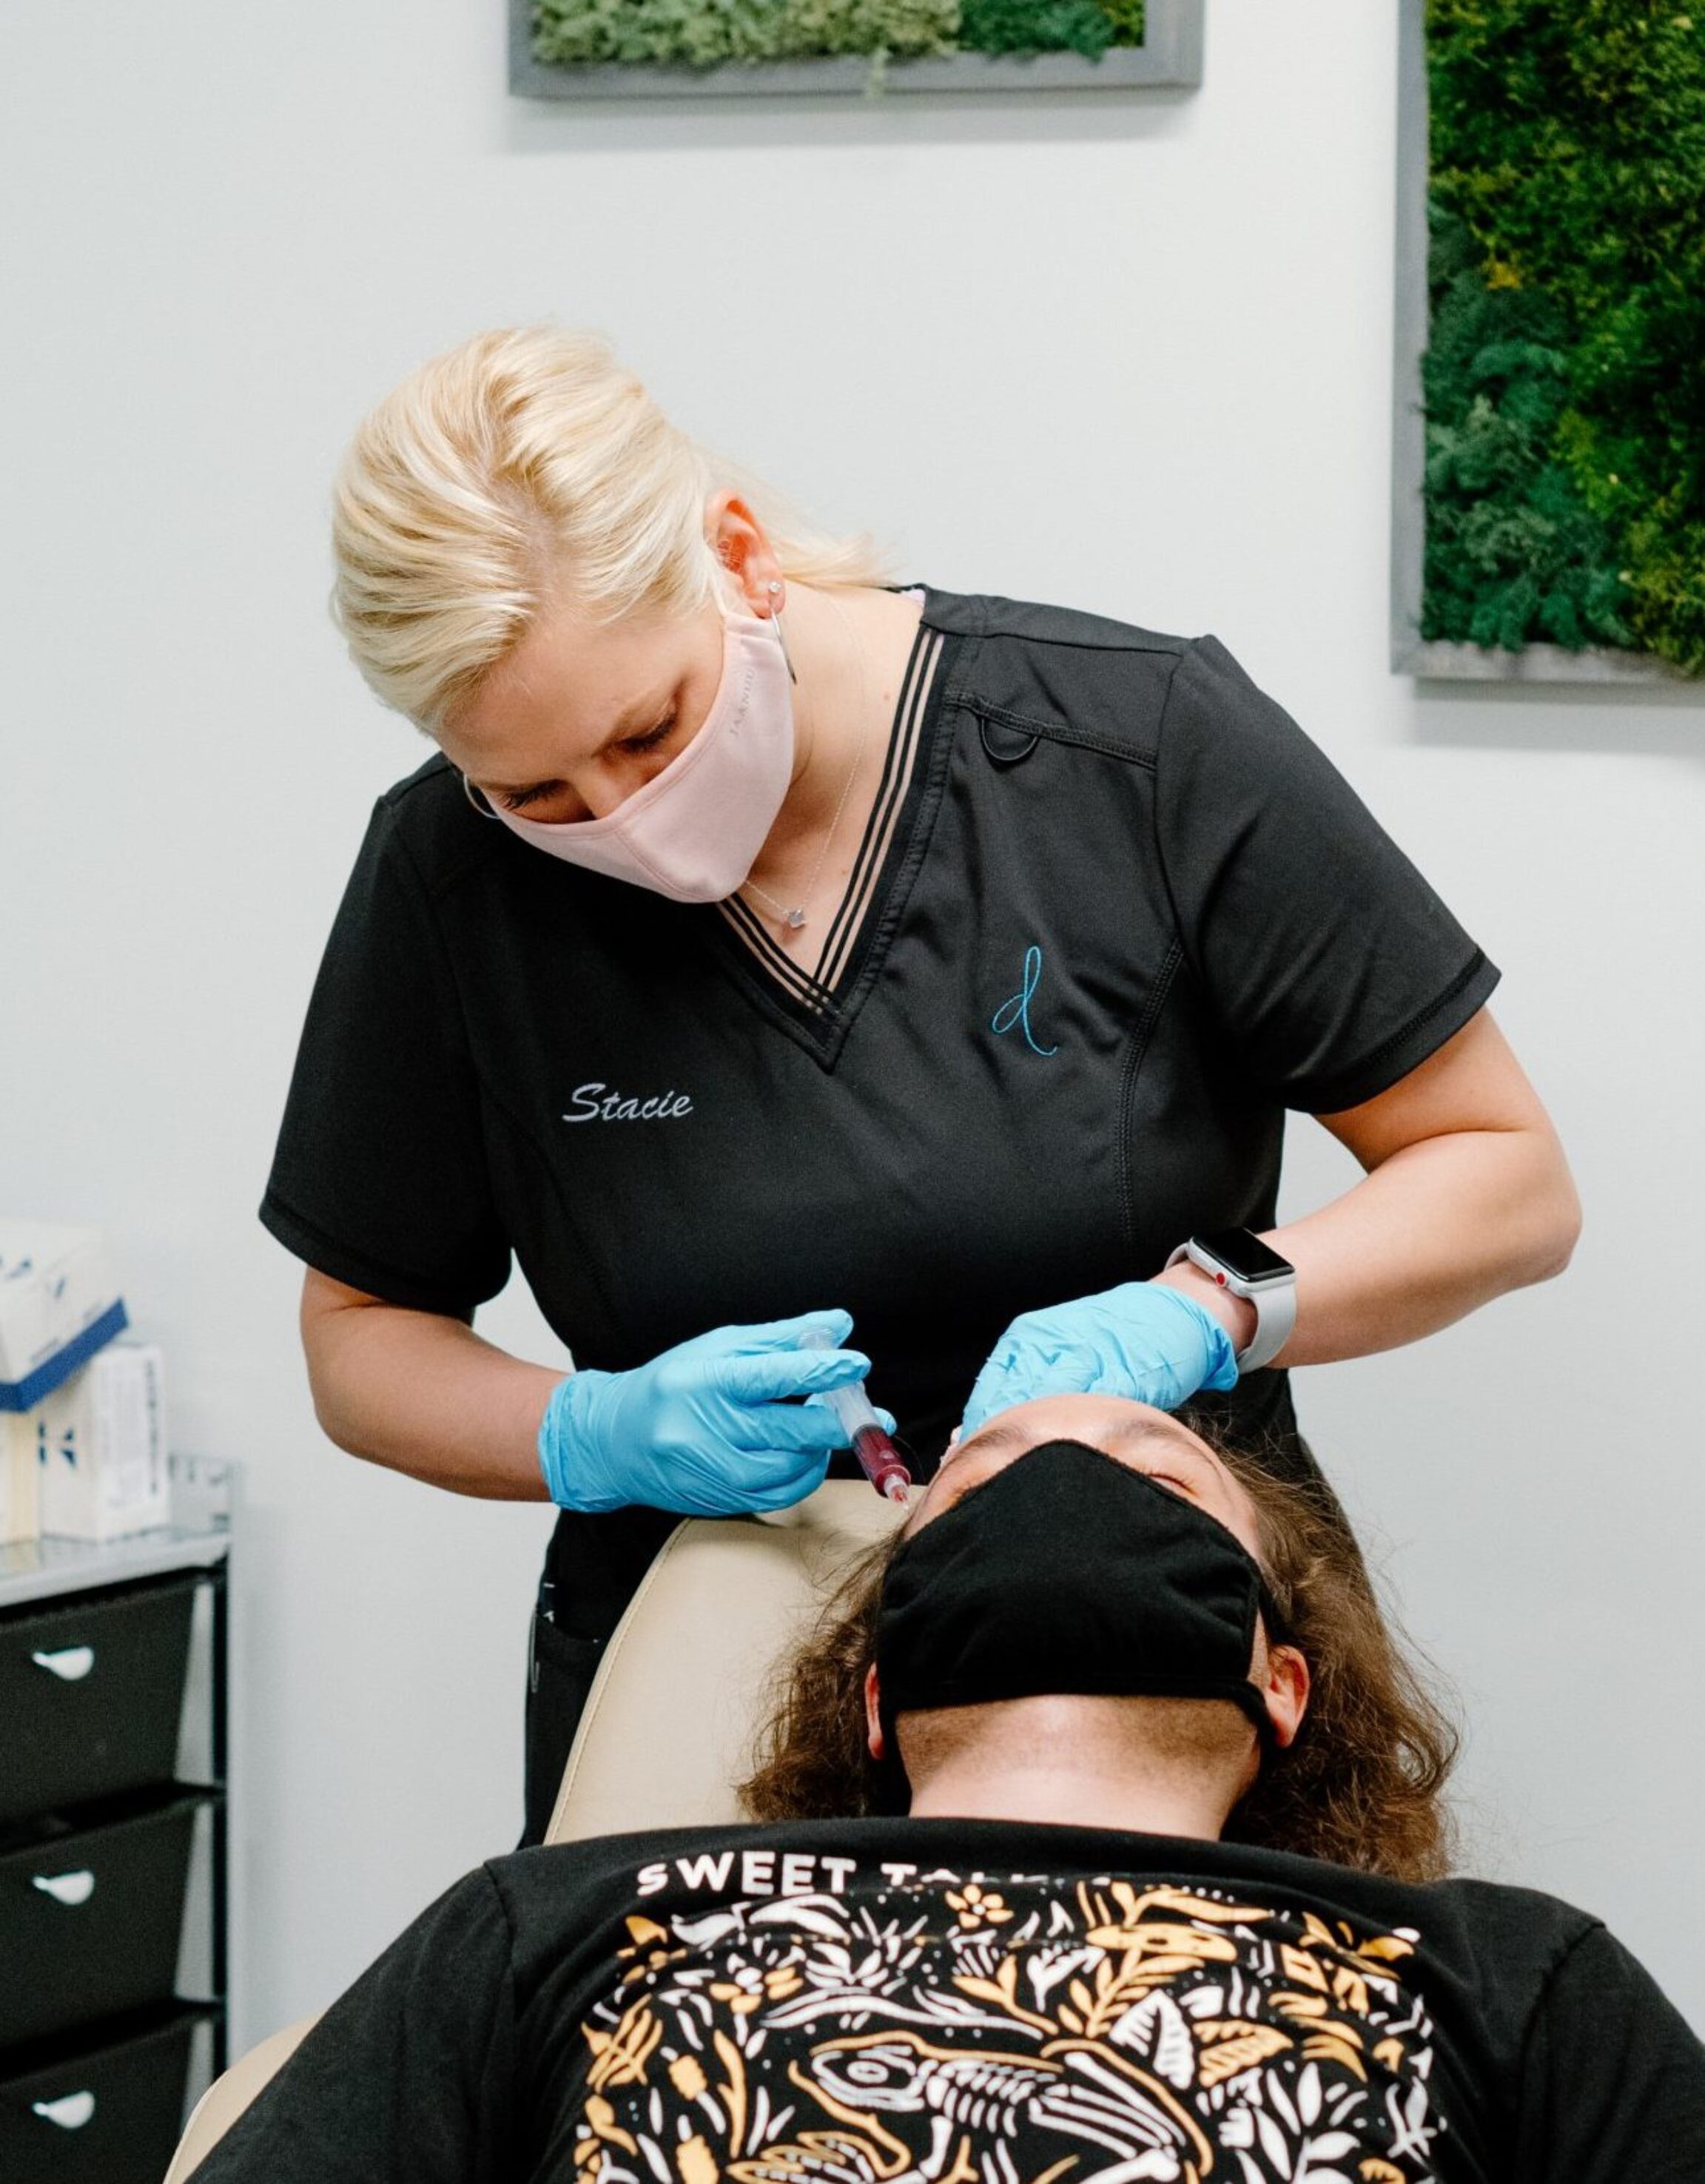 Hair Restoration treatment being performed